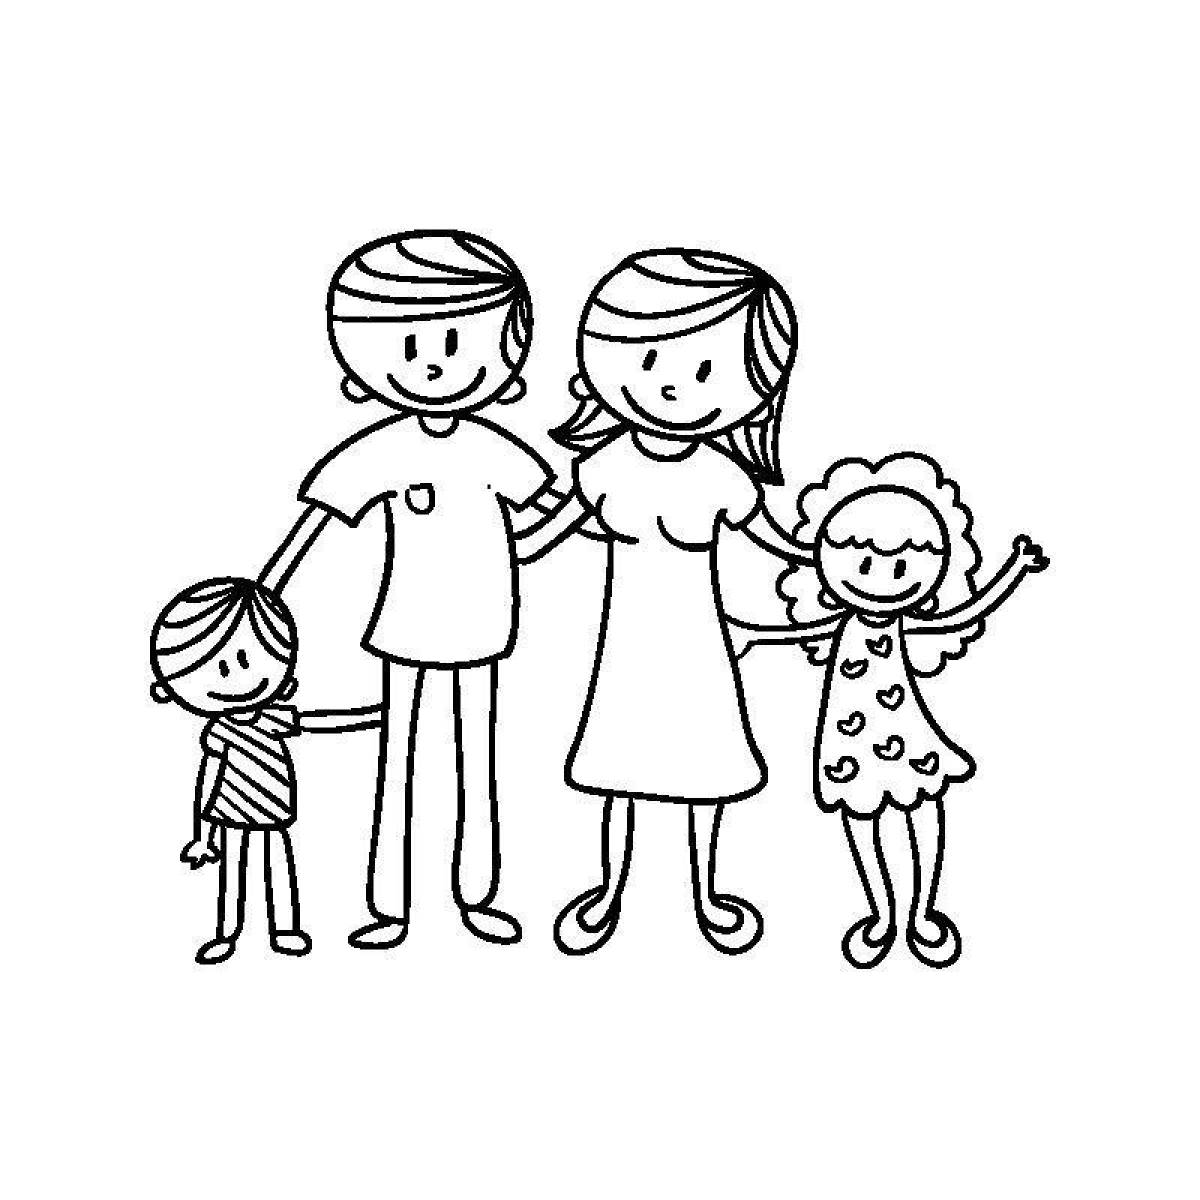 Coloring page affectionate mom and dad